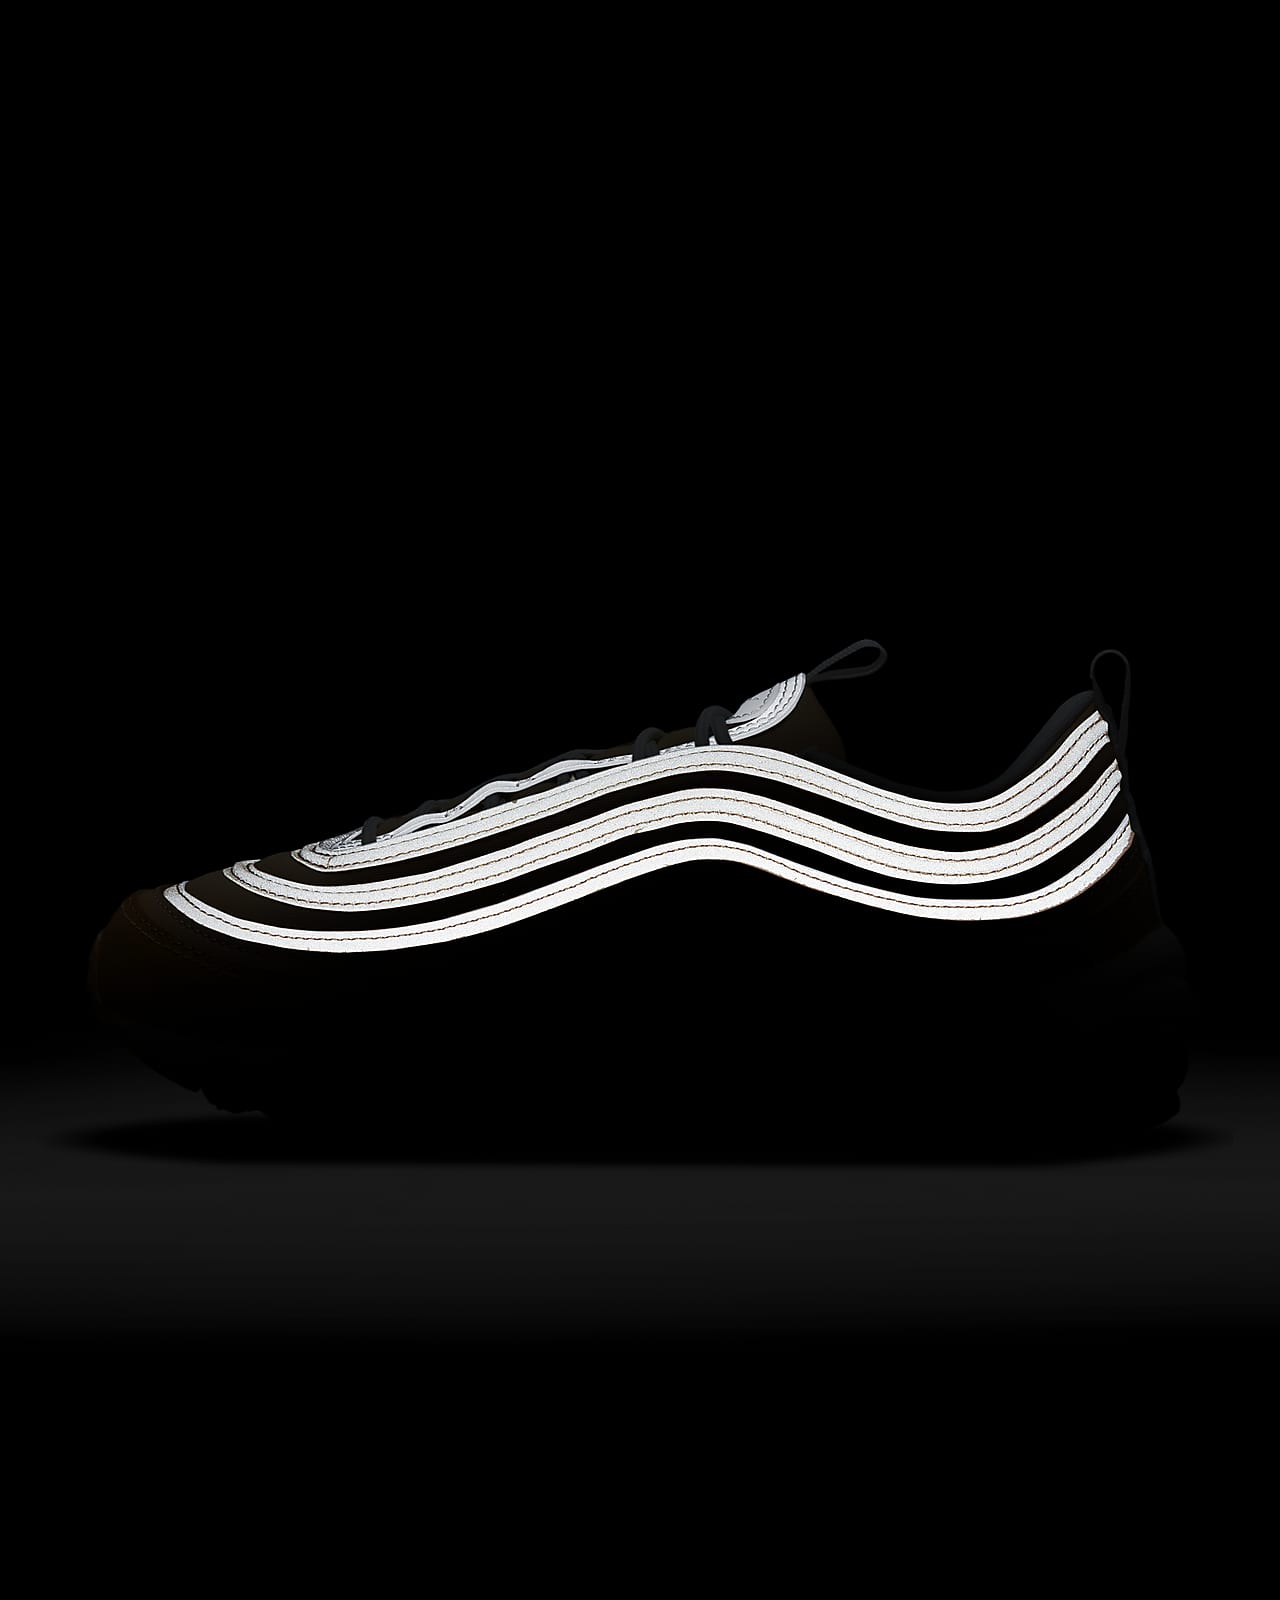 black and white 97s womens